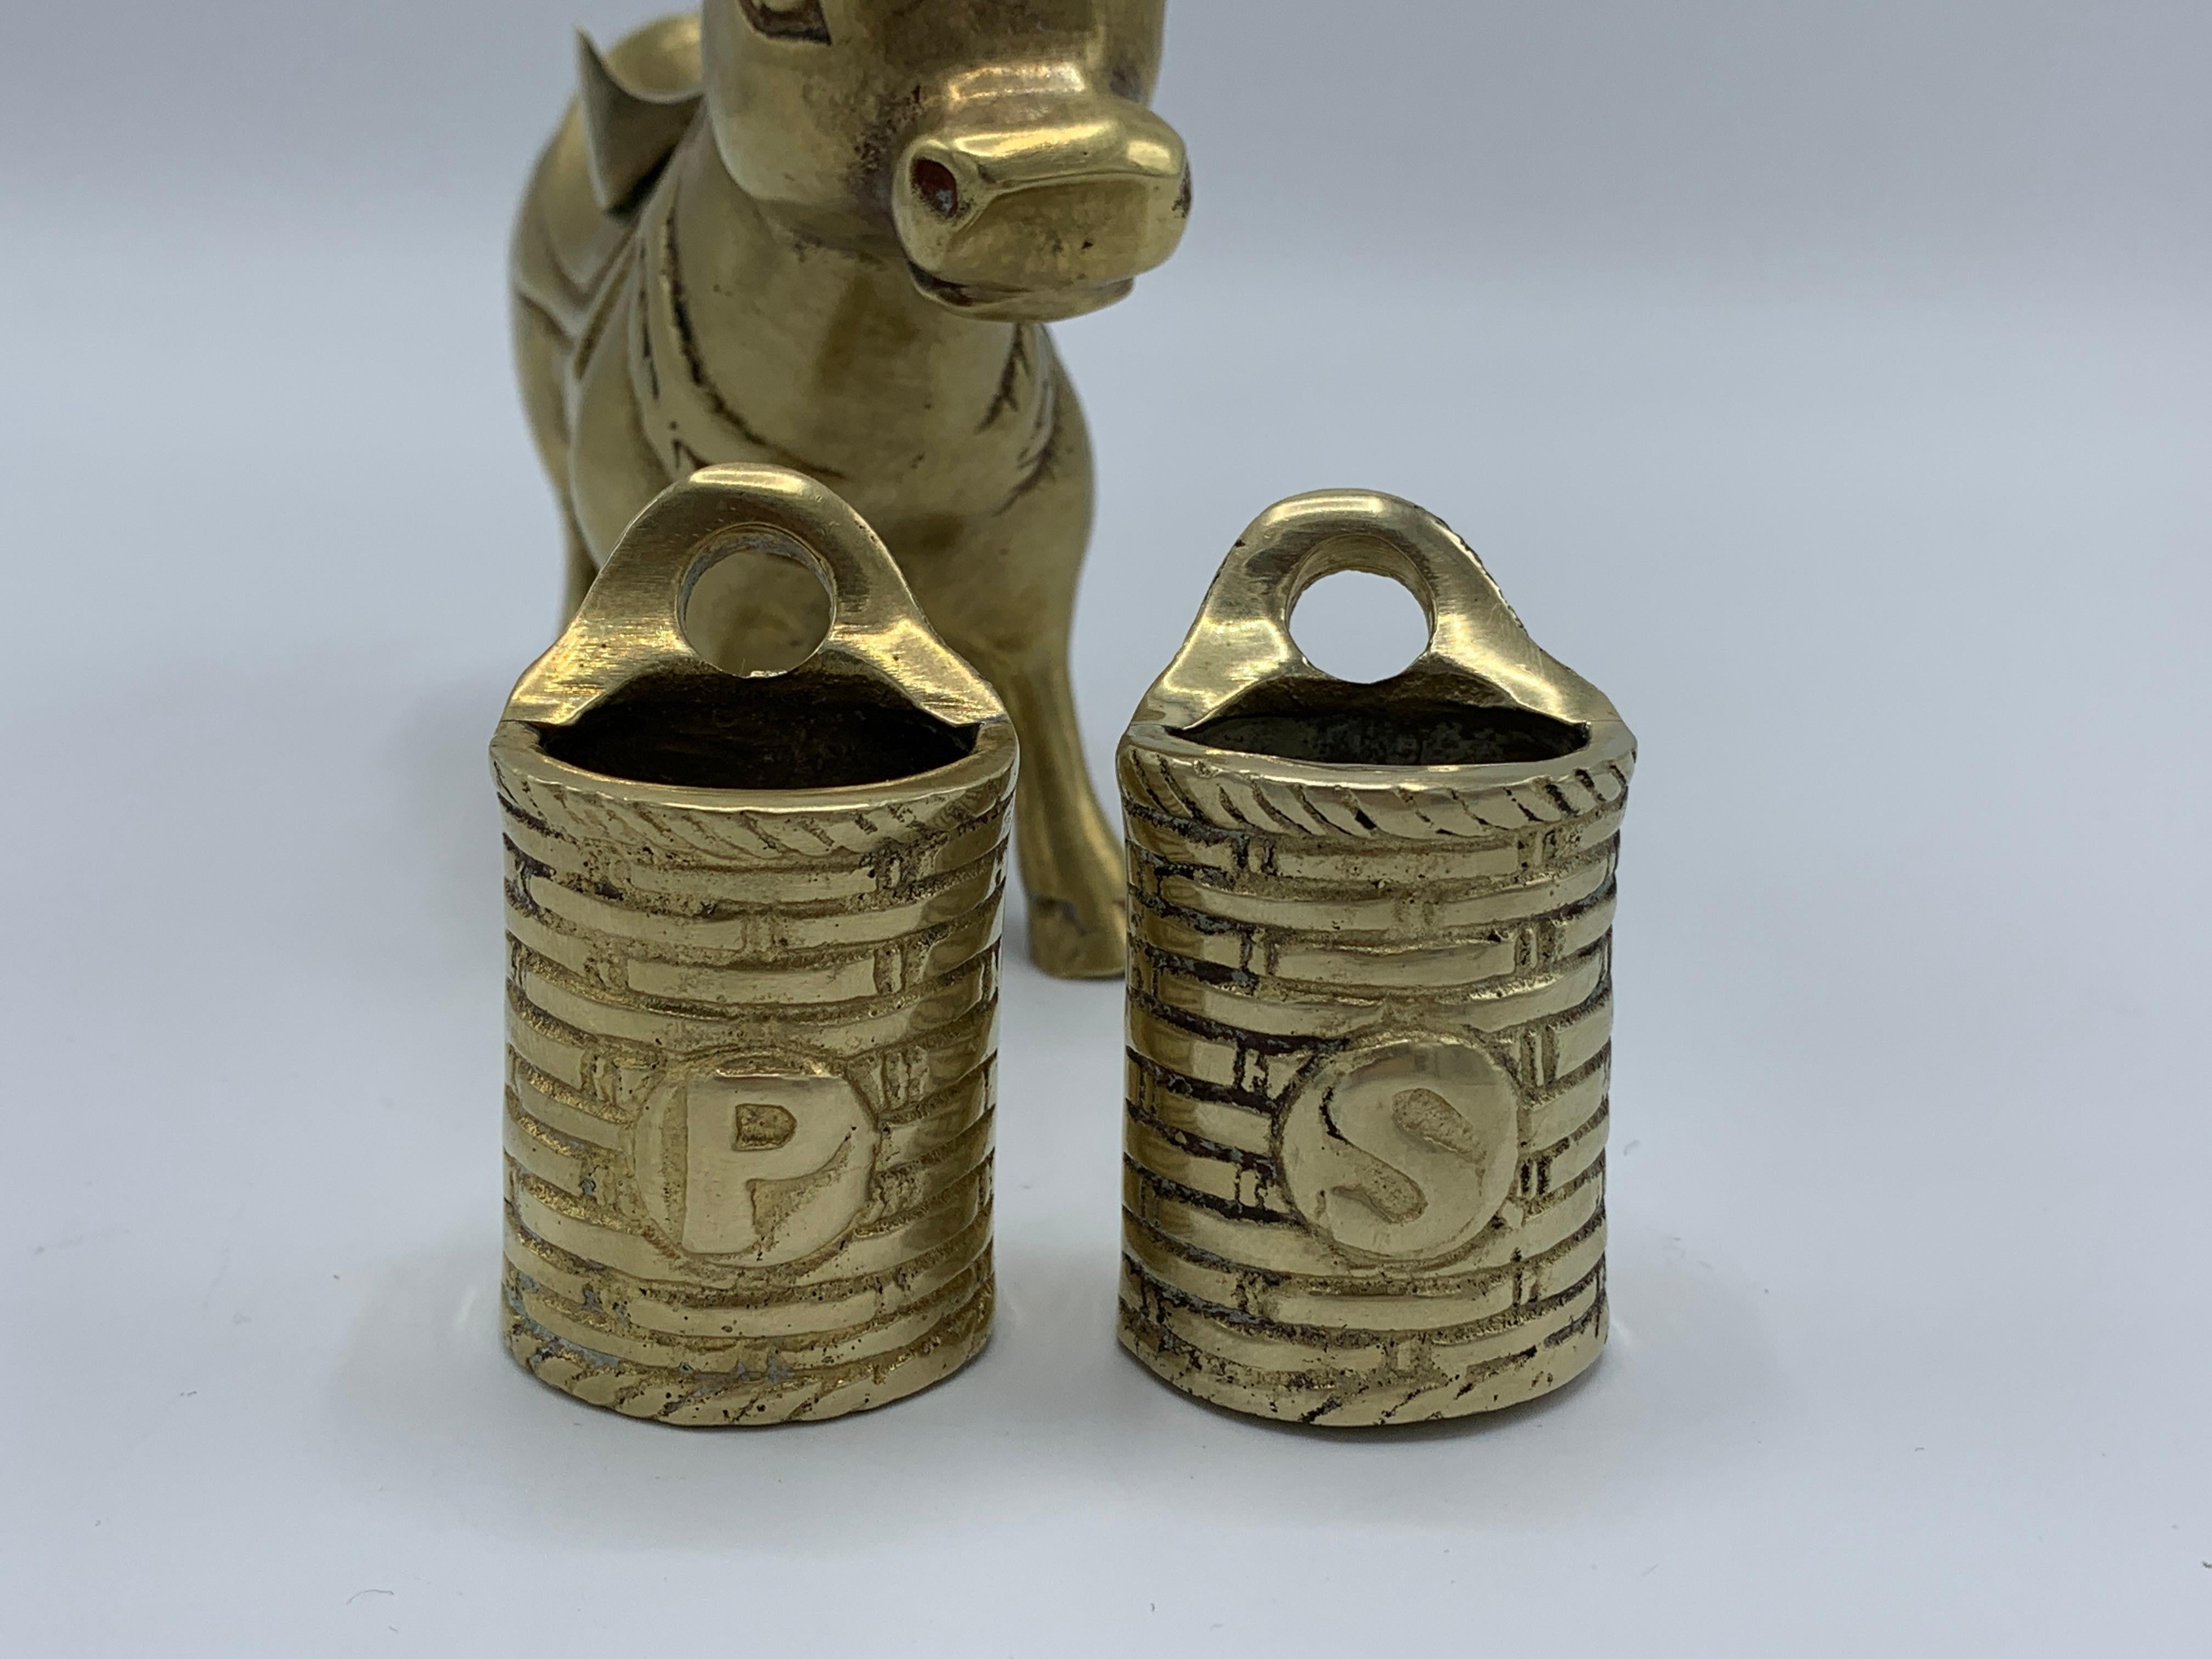 1960s Brass Mule with Saddle Bag Salt and Pepper Shaker Set 4